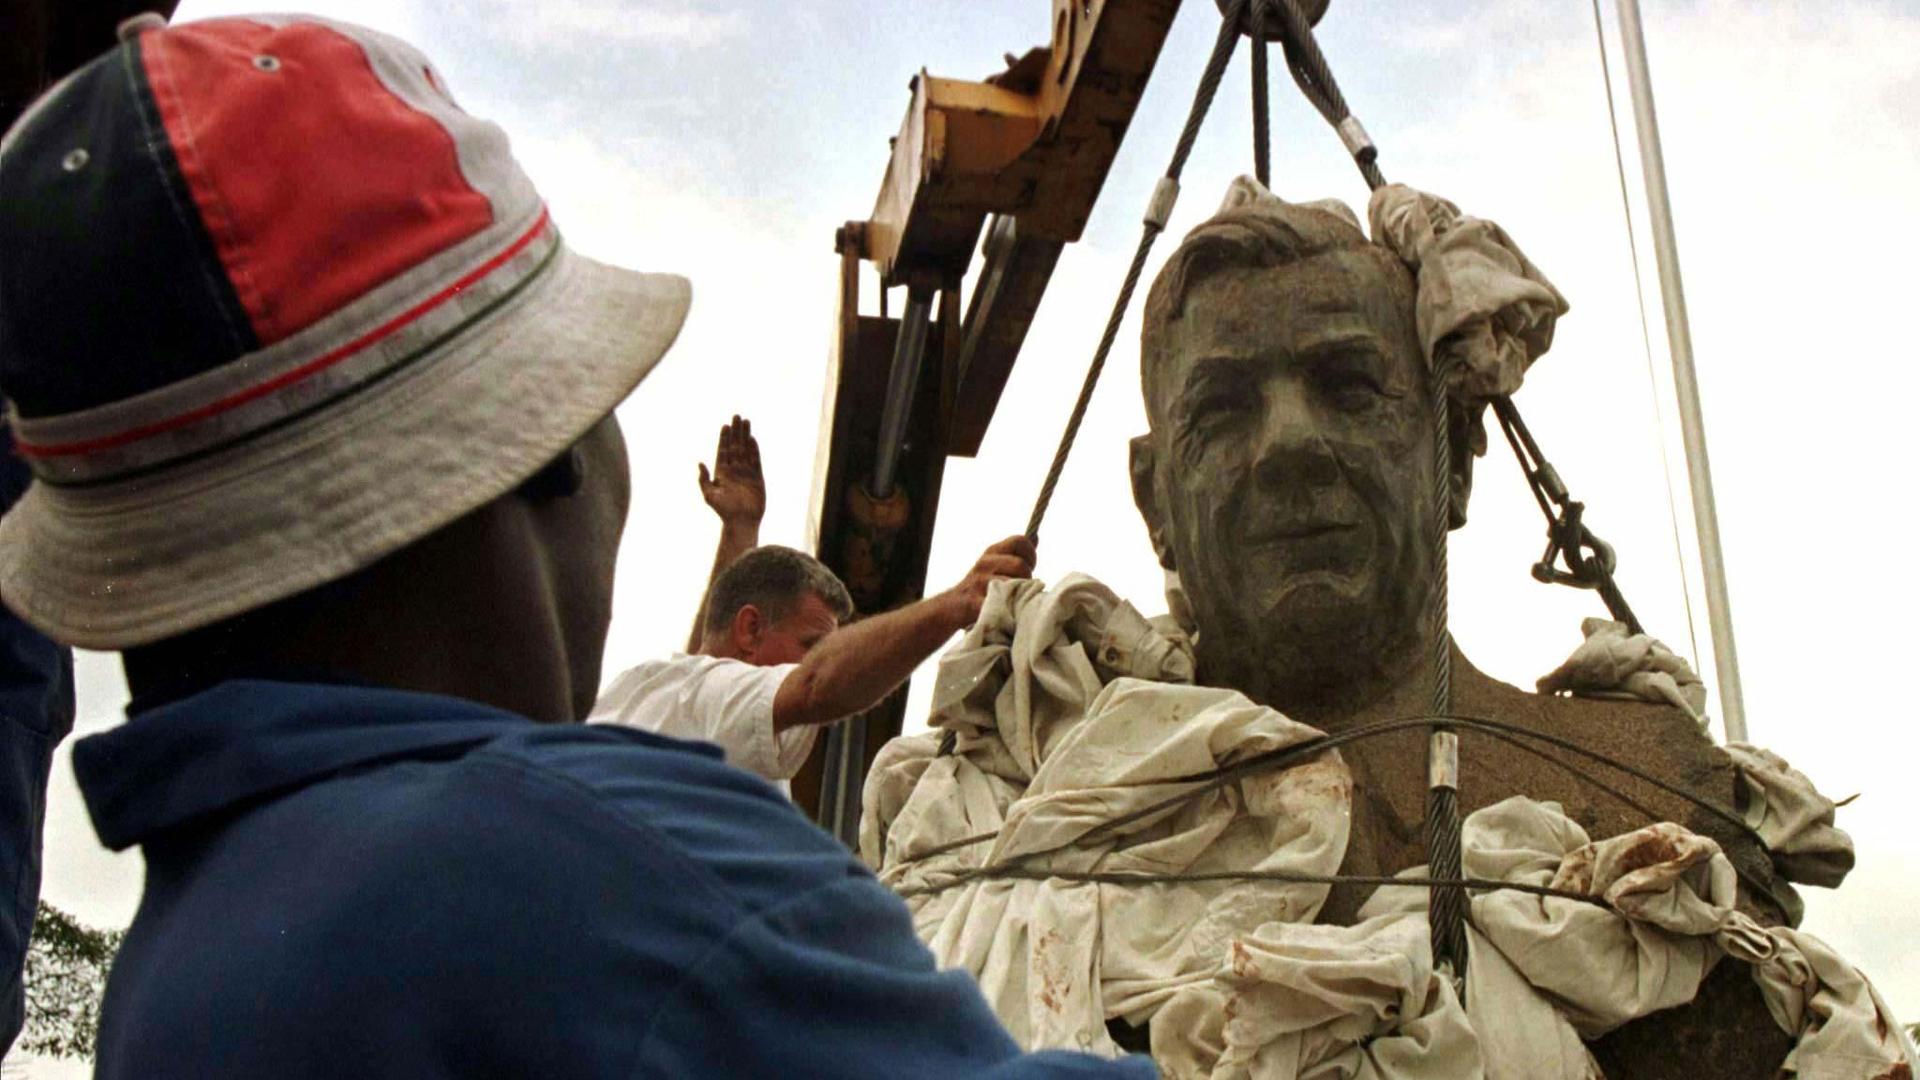 A man watches the bust of South Africa's Apartheid Architect, Hendrik Verwoerd, being removed from the entrance of Pretoria's main hospital named after him.